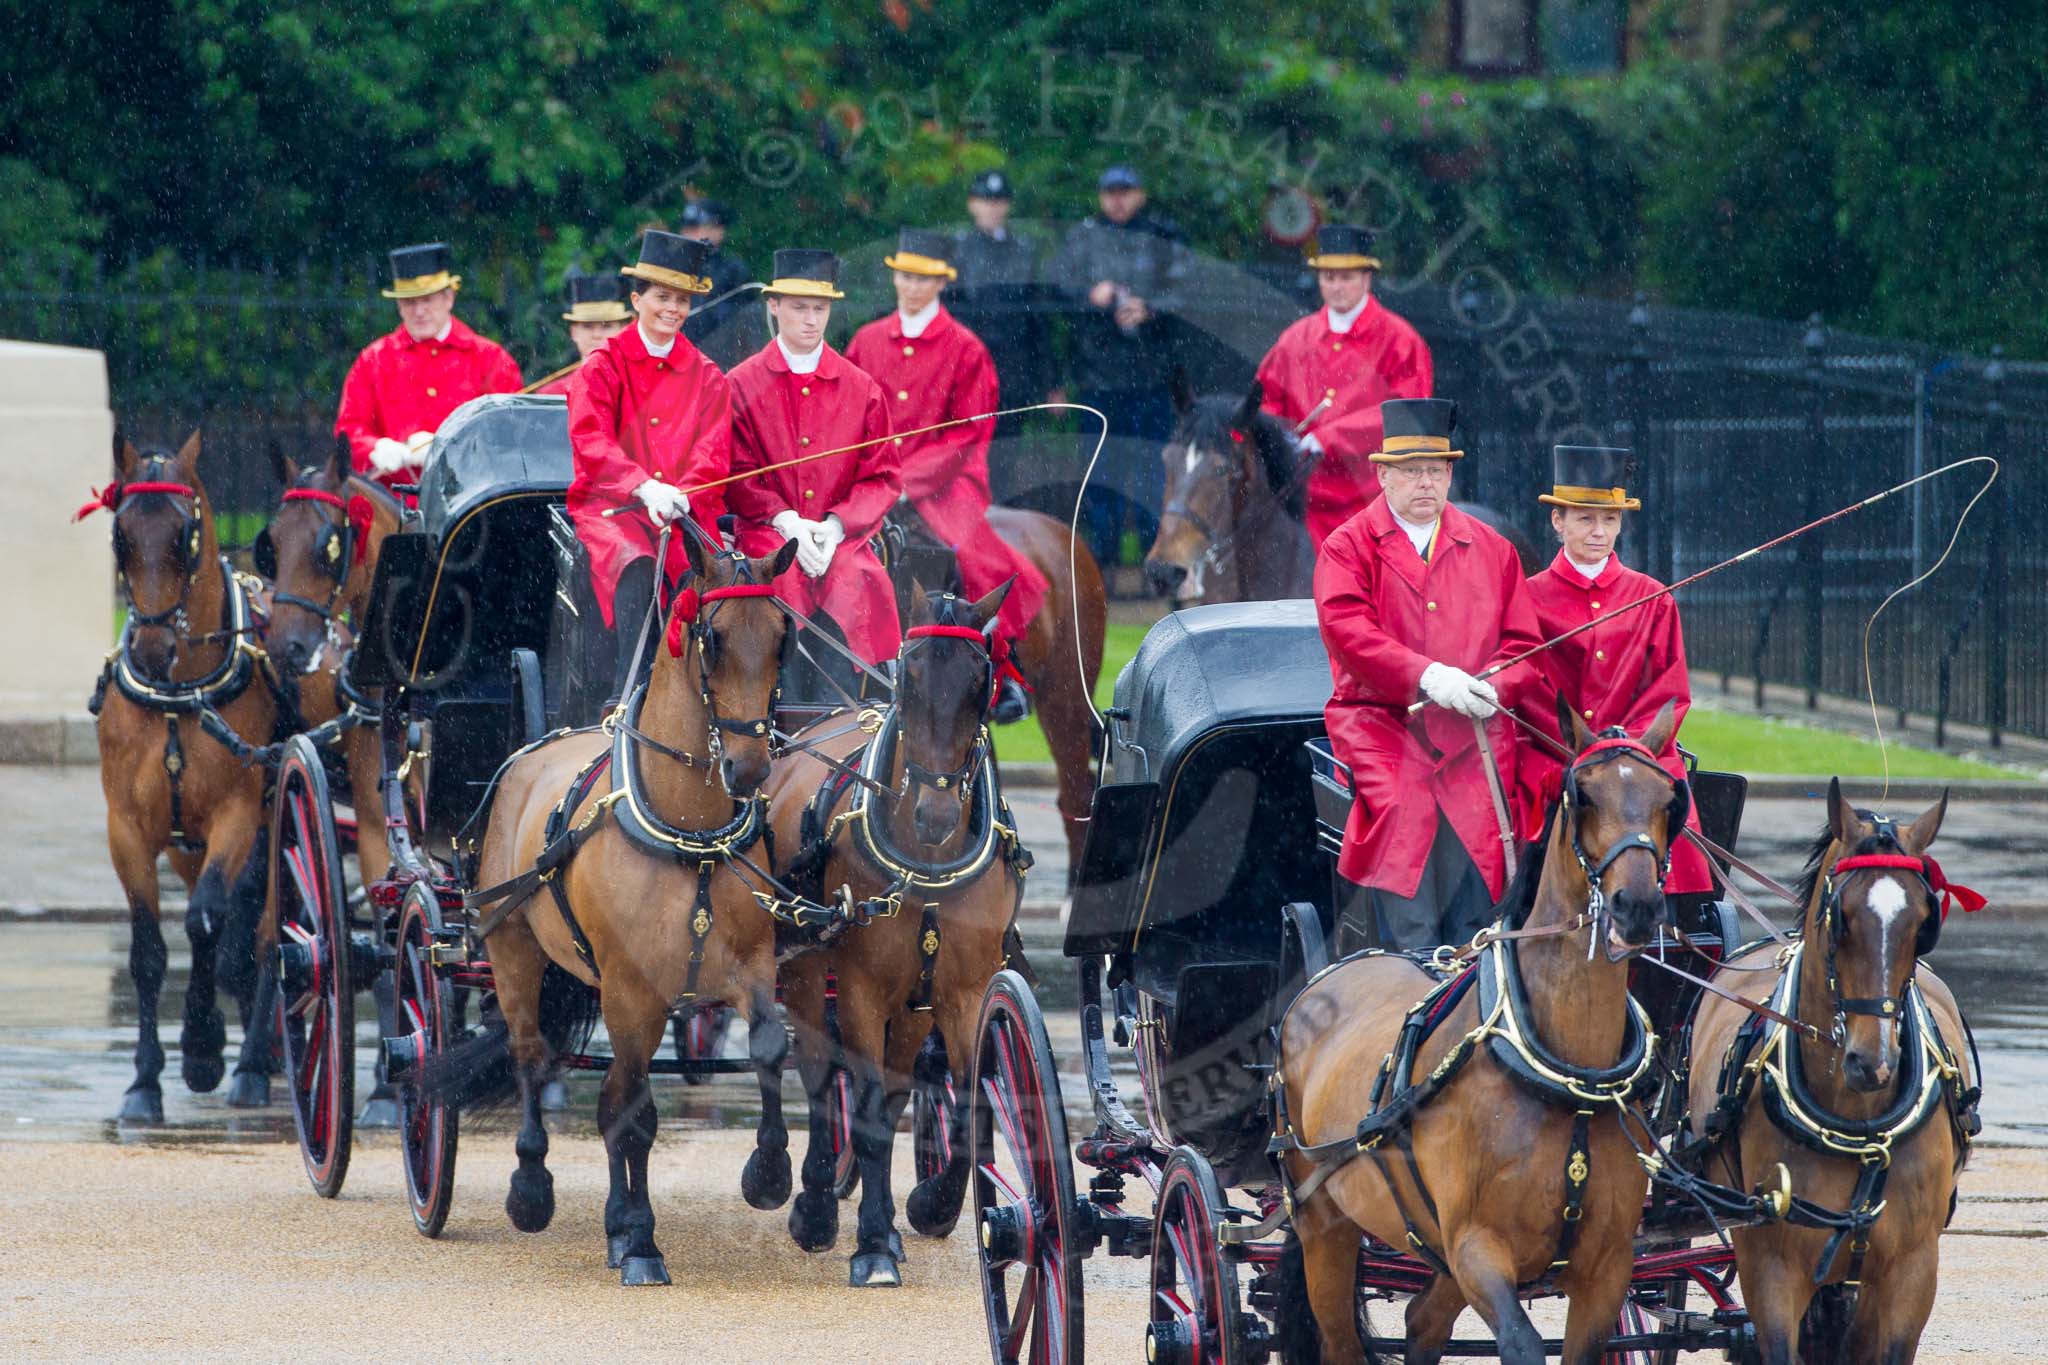 The Colonel's Review 2014.
Horse Guards Parade, Westminster,
London,

United Kingdom,
on 07 June 2014 at 10:50, image #204